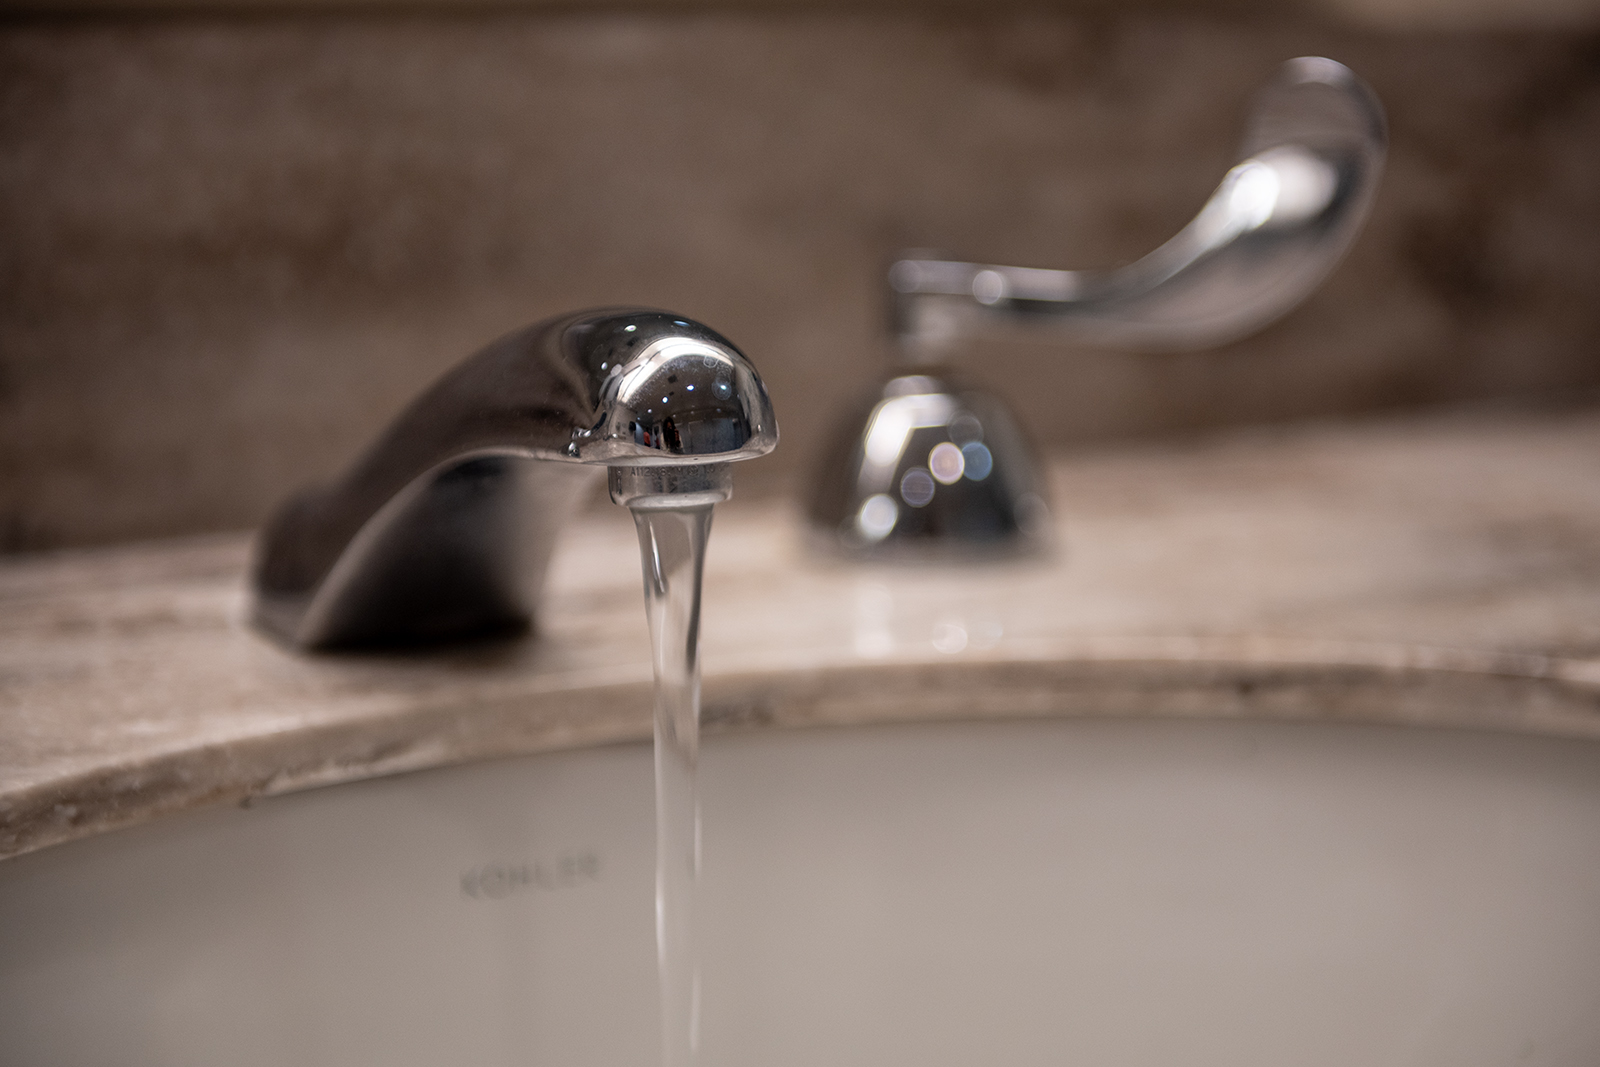 Water contamination one of many safety concerns requiring better flow